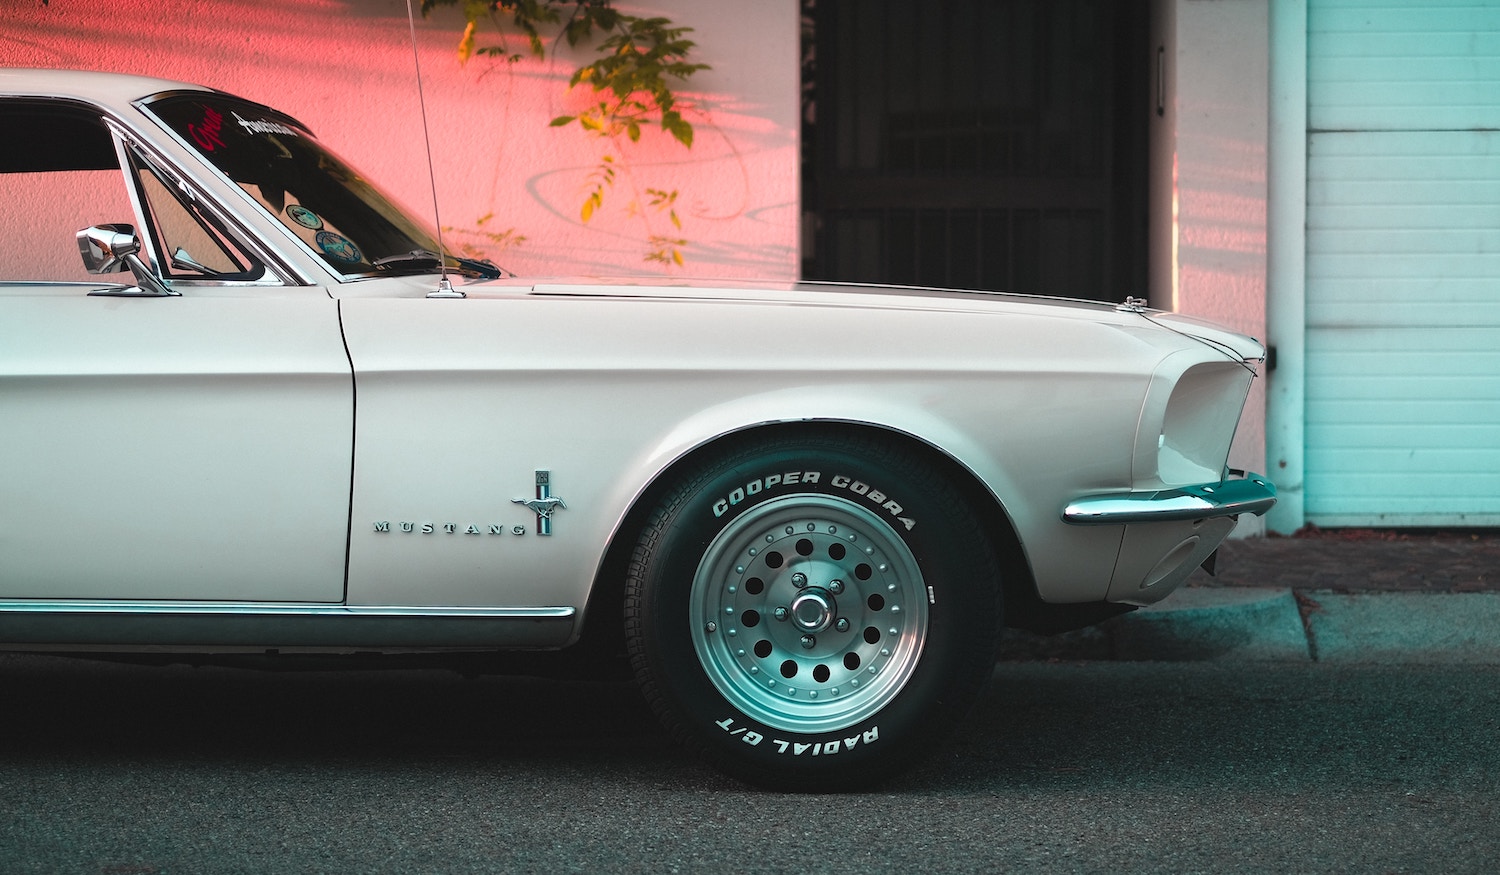 The front fender on a classic white Ford Mustang.